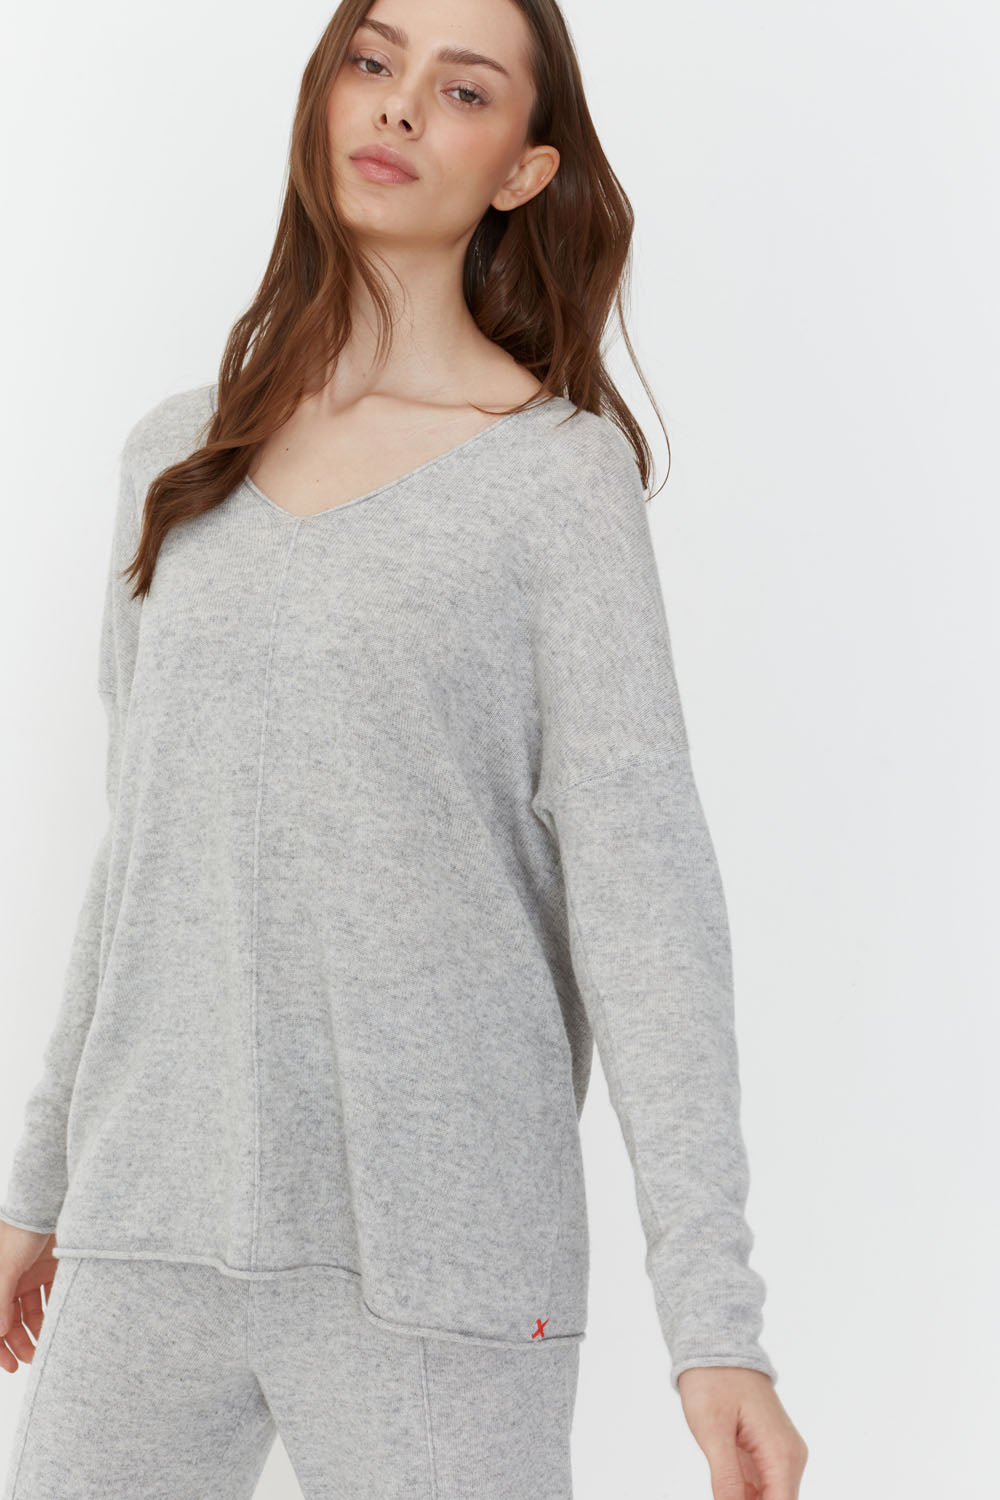 Grey-Marl Wool-Cashmere Slouchy Scoop Sweater